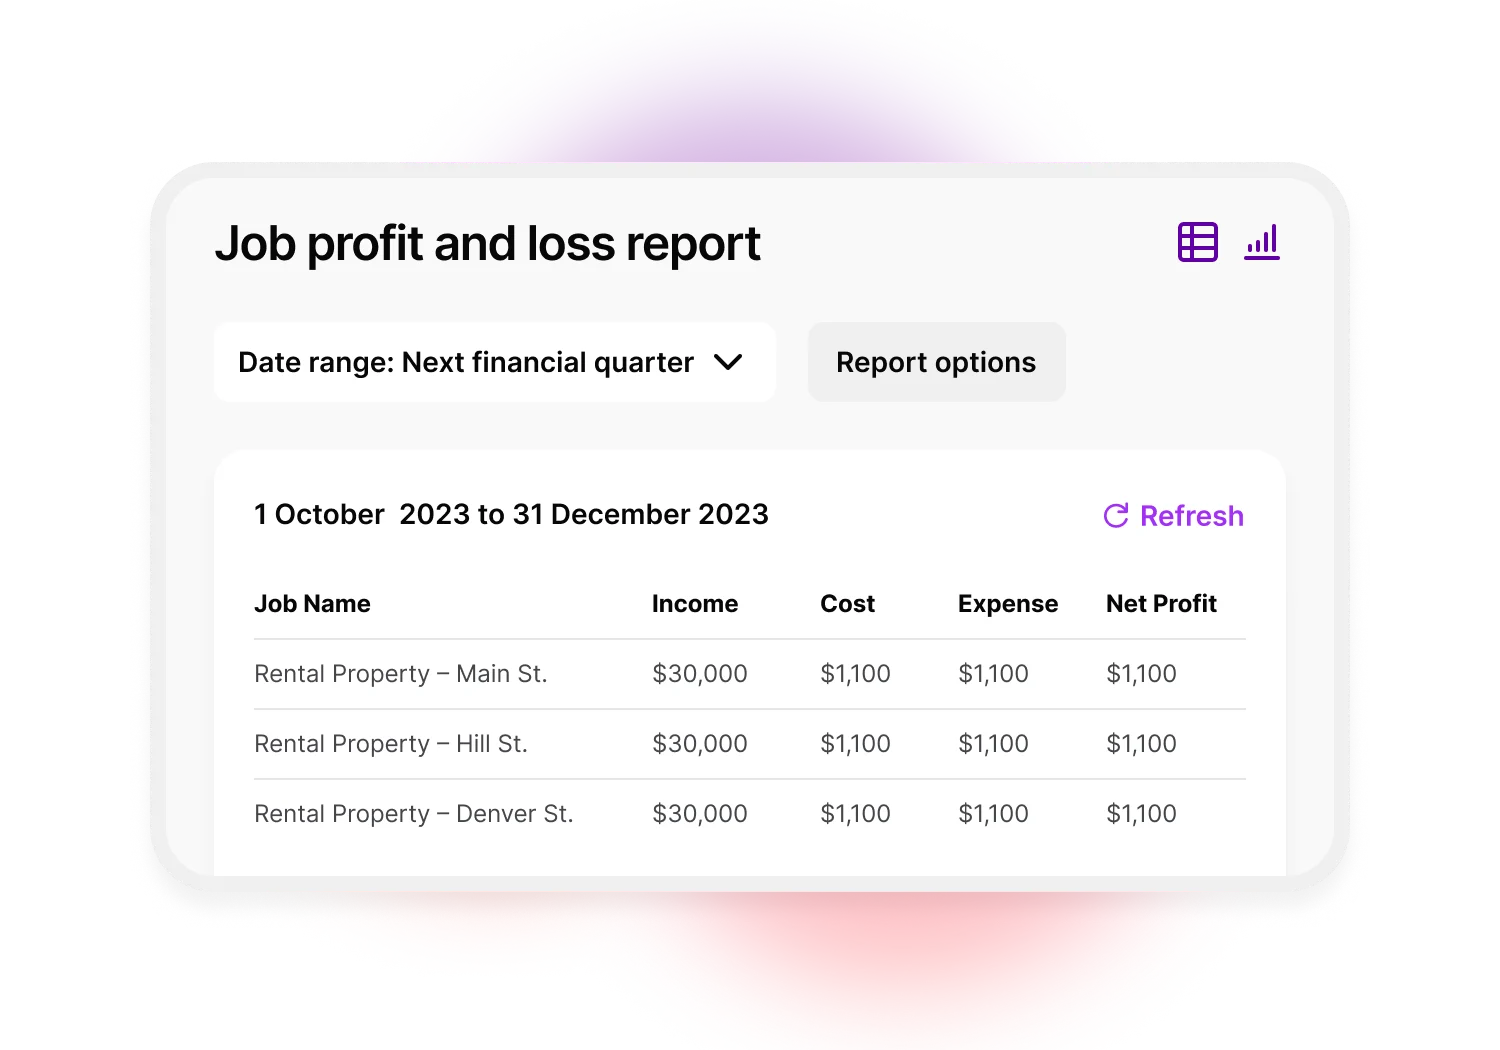 A simplifed view of the job profit and loss report in MYOB Business software. The report includes an option to switch between a table or a bar graph. There's the option to select a date range on the left hand side and below is the date selected, job name, income, cost, expense and net profit by job.